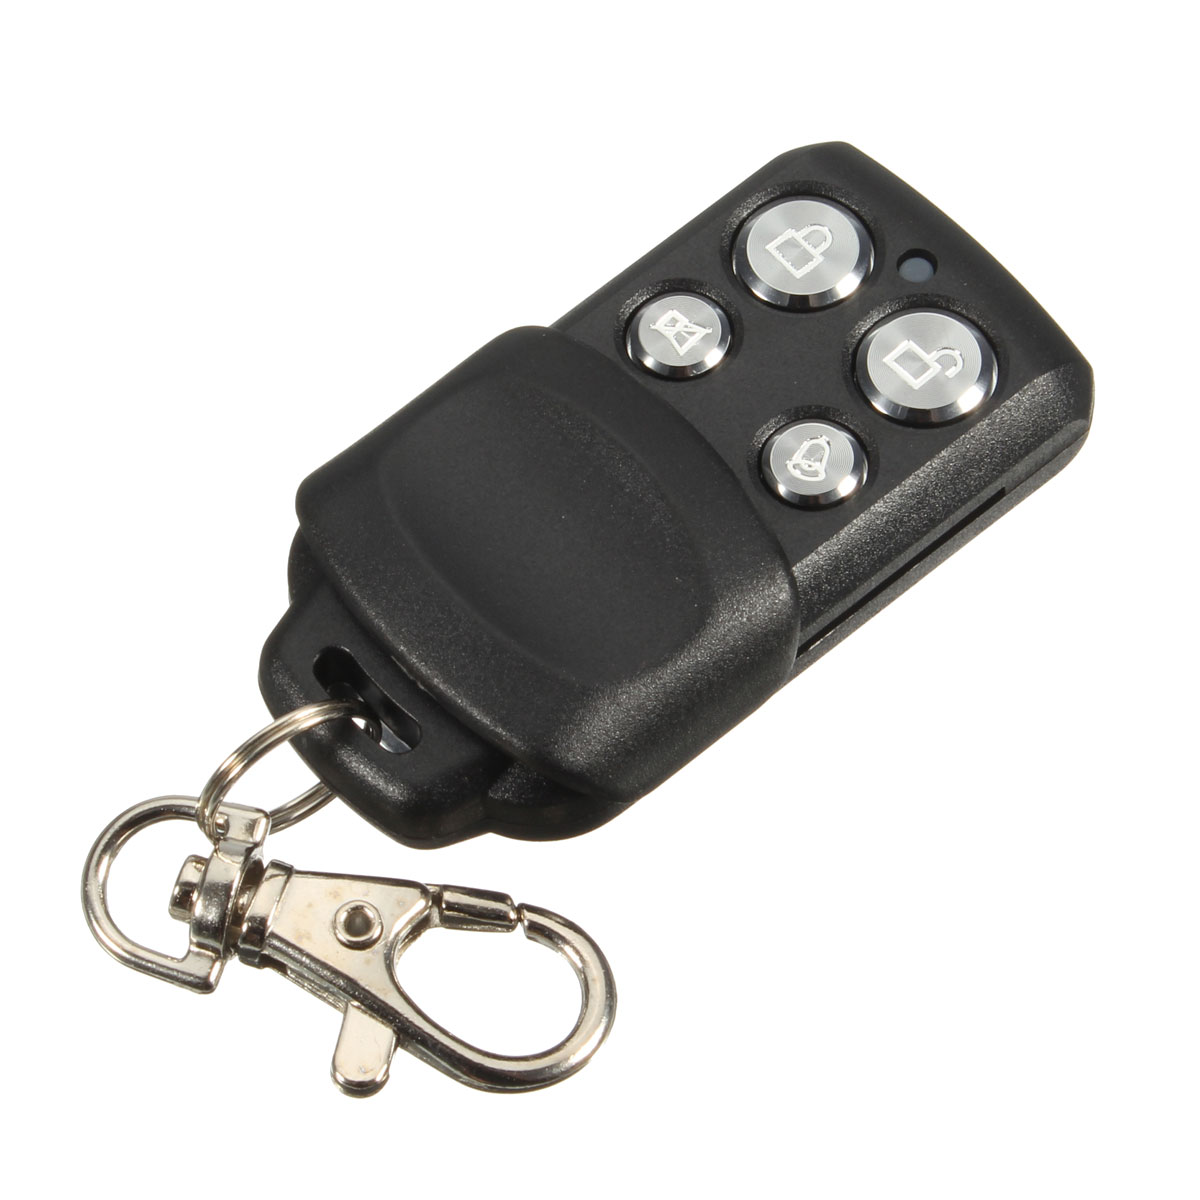 4-Button-433MHz-Garage-Gate-Key-Remote-Control-For-HE60-HE60R-HE60ANZ-HE4331-1064141